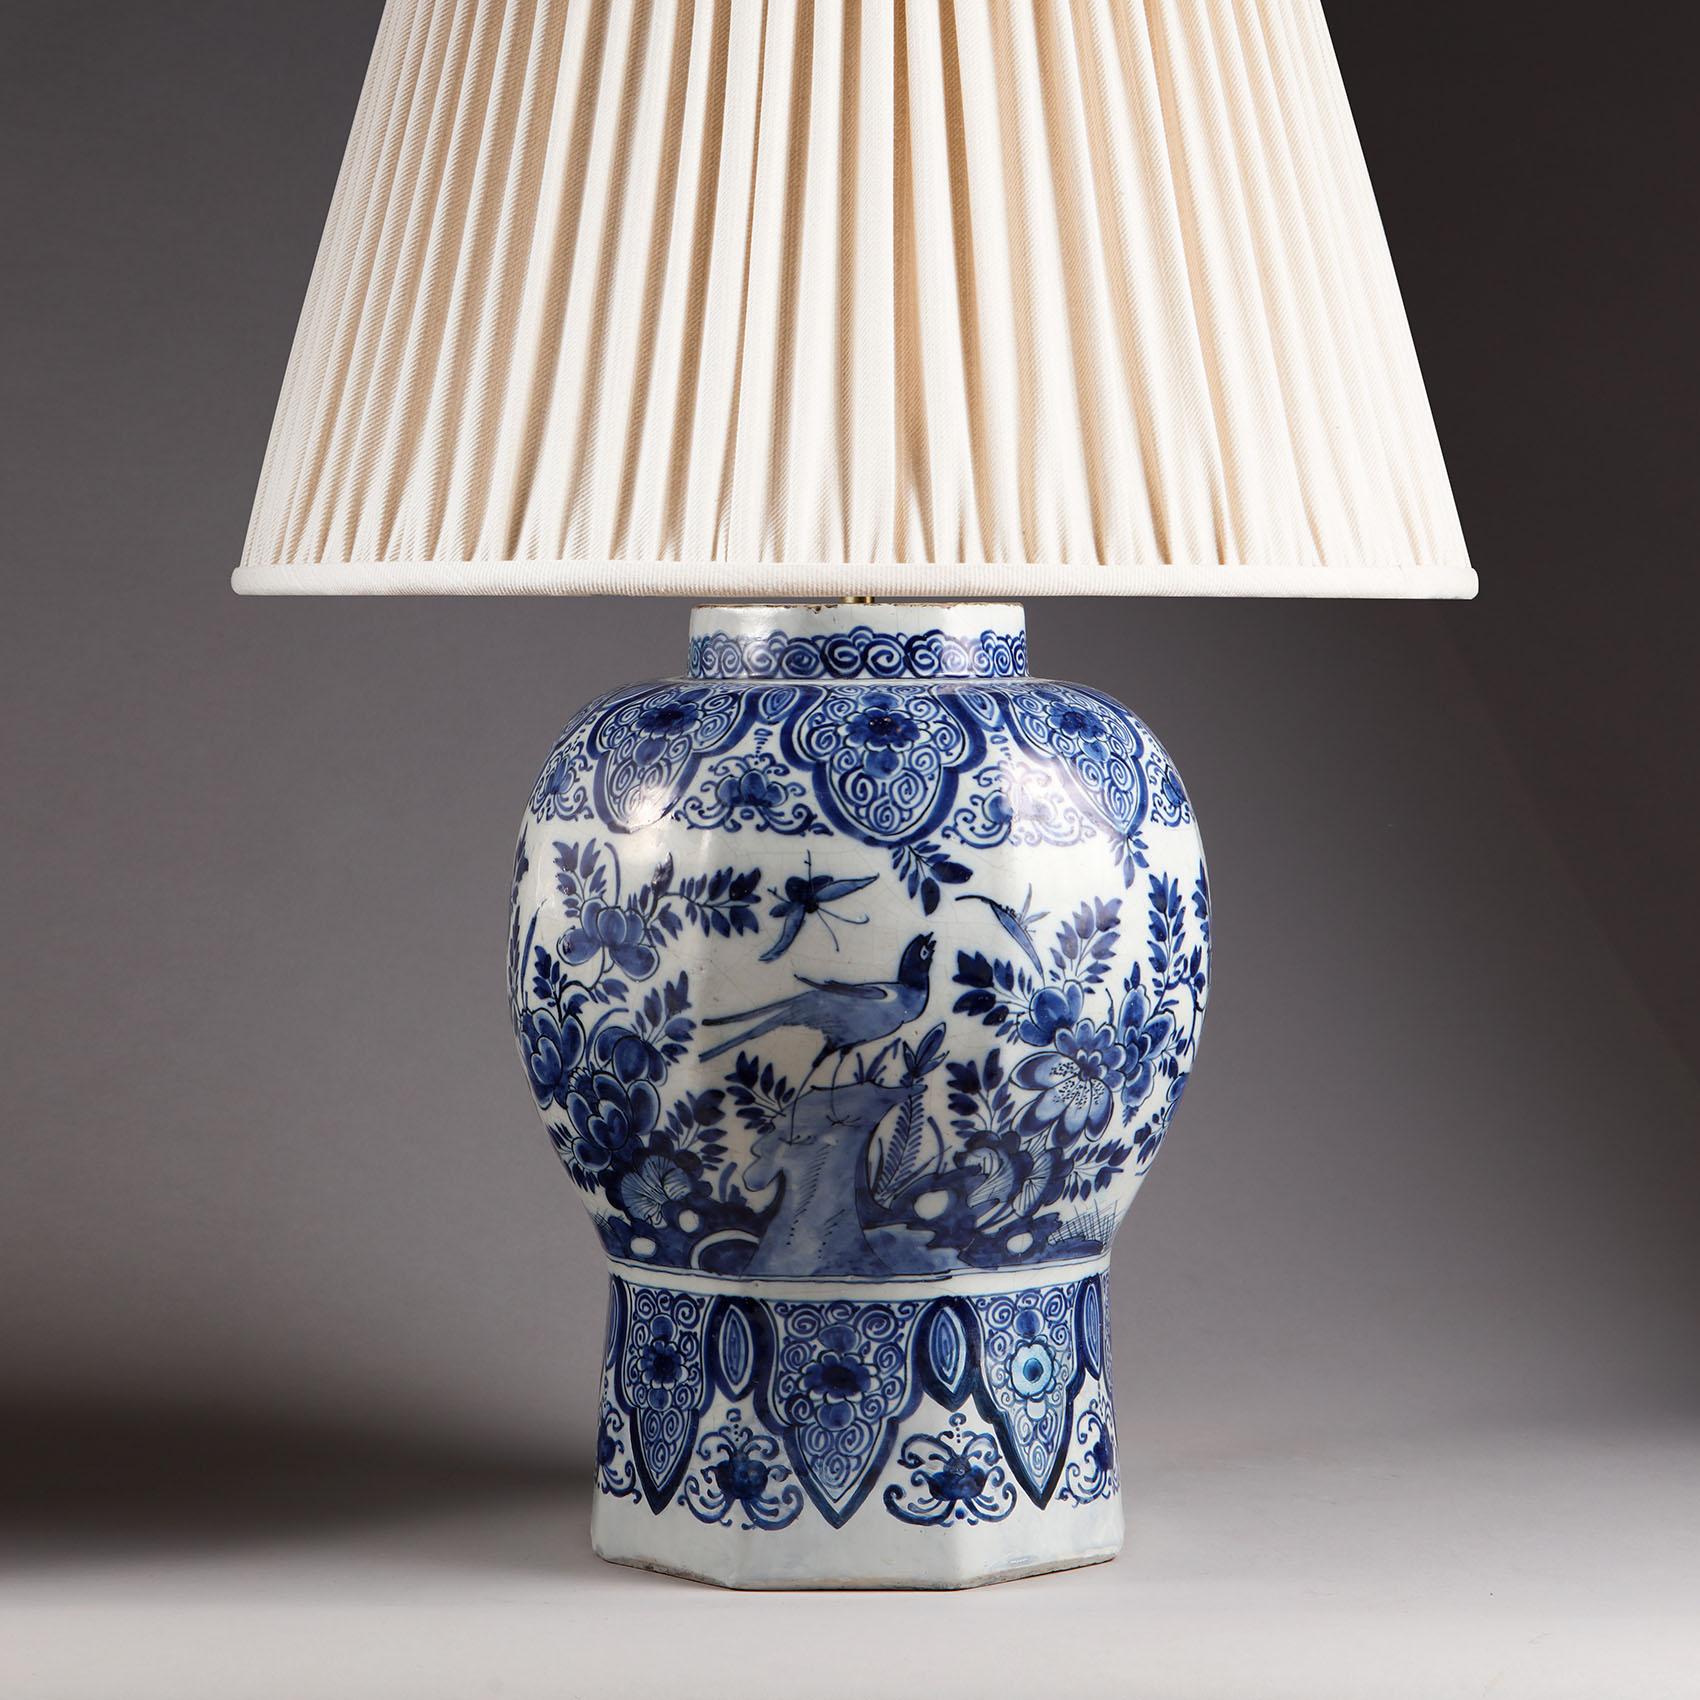 Ceramic 18th Century Delft Blue and White Vase Mounted as a Table Lamp